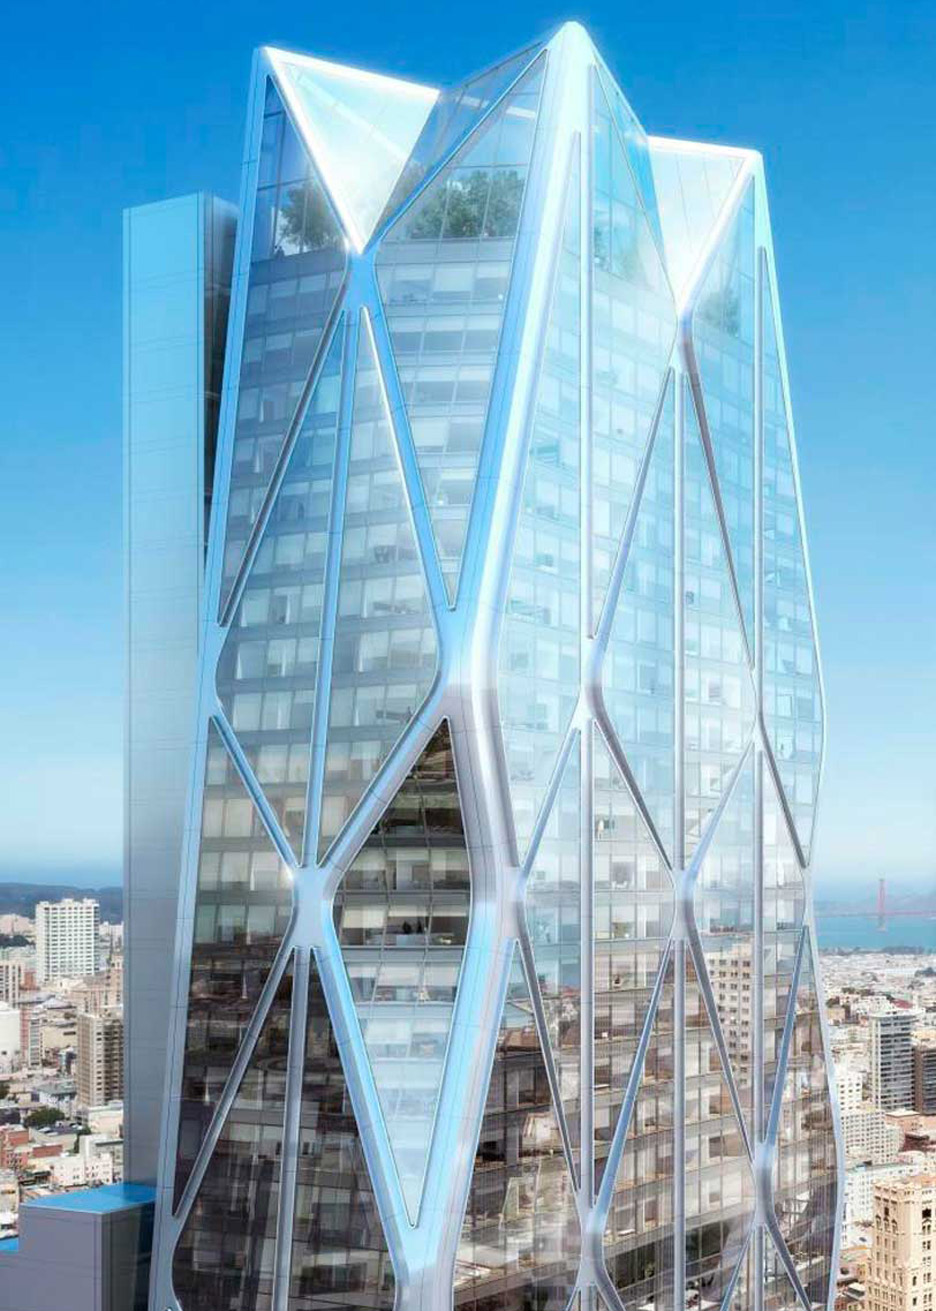 Architecture news: Oceanwide Center by Foster + Partners and Heller Manus in San Francisco, USA